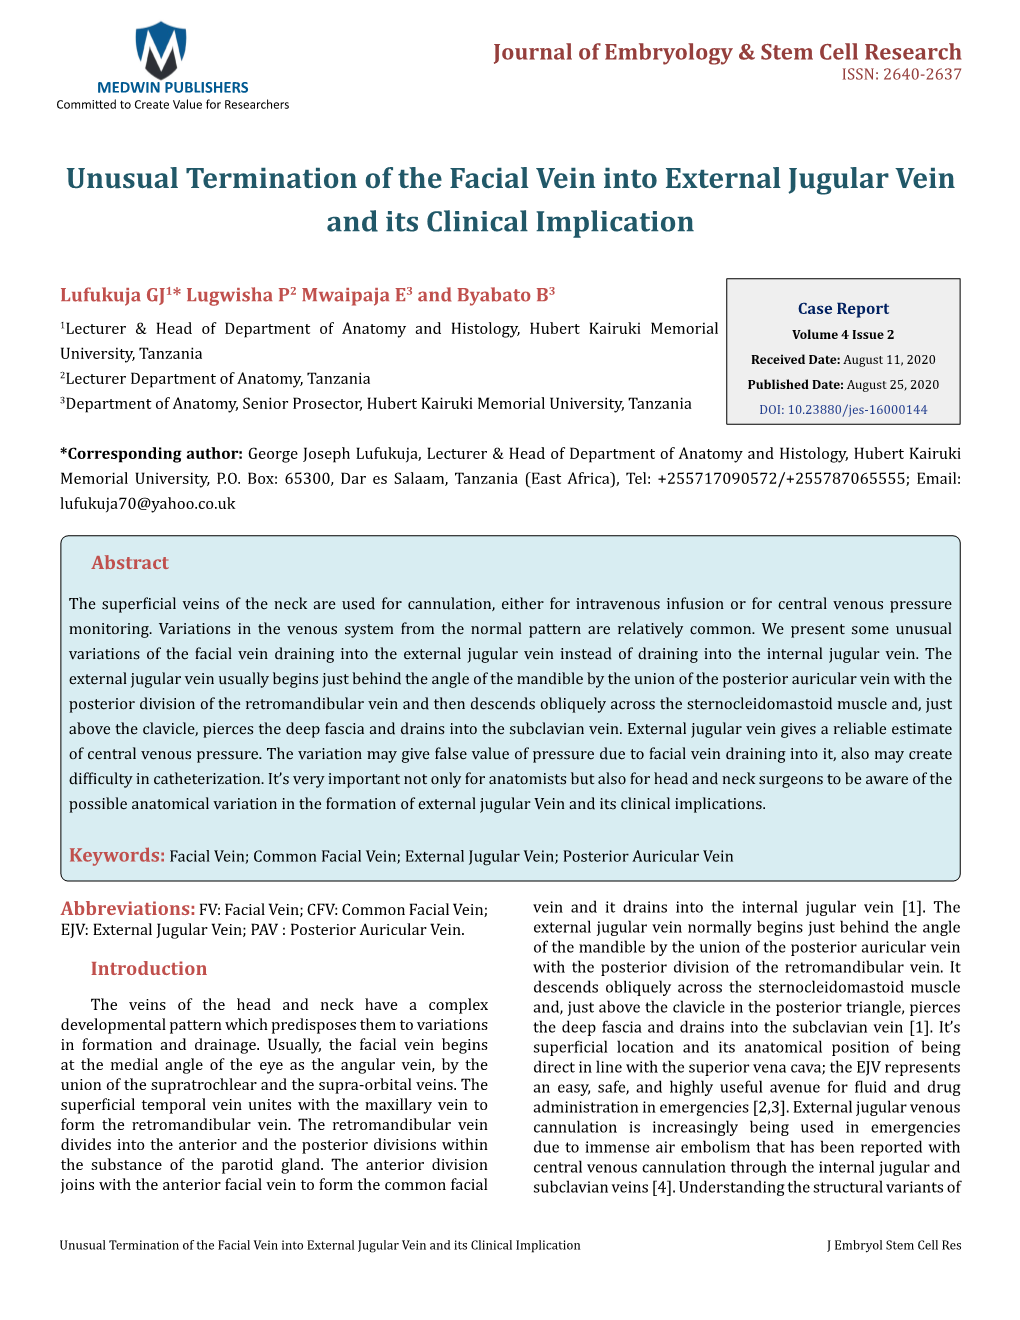 Unusual Termination of the Facial Vein Into External Jugular Vein and Its Clinical Implication